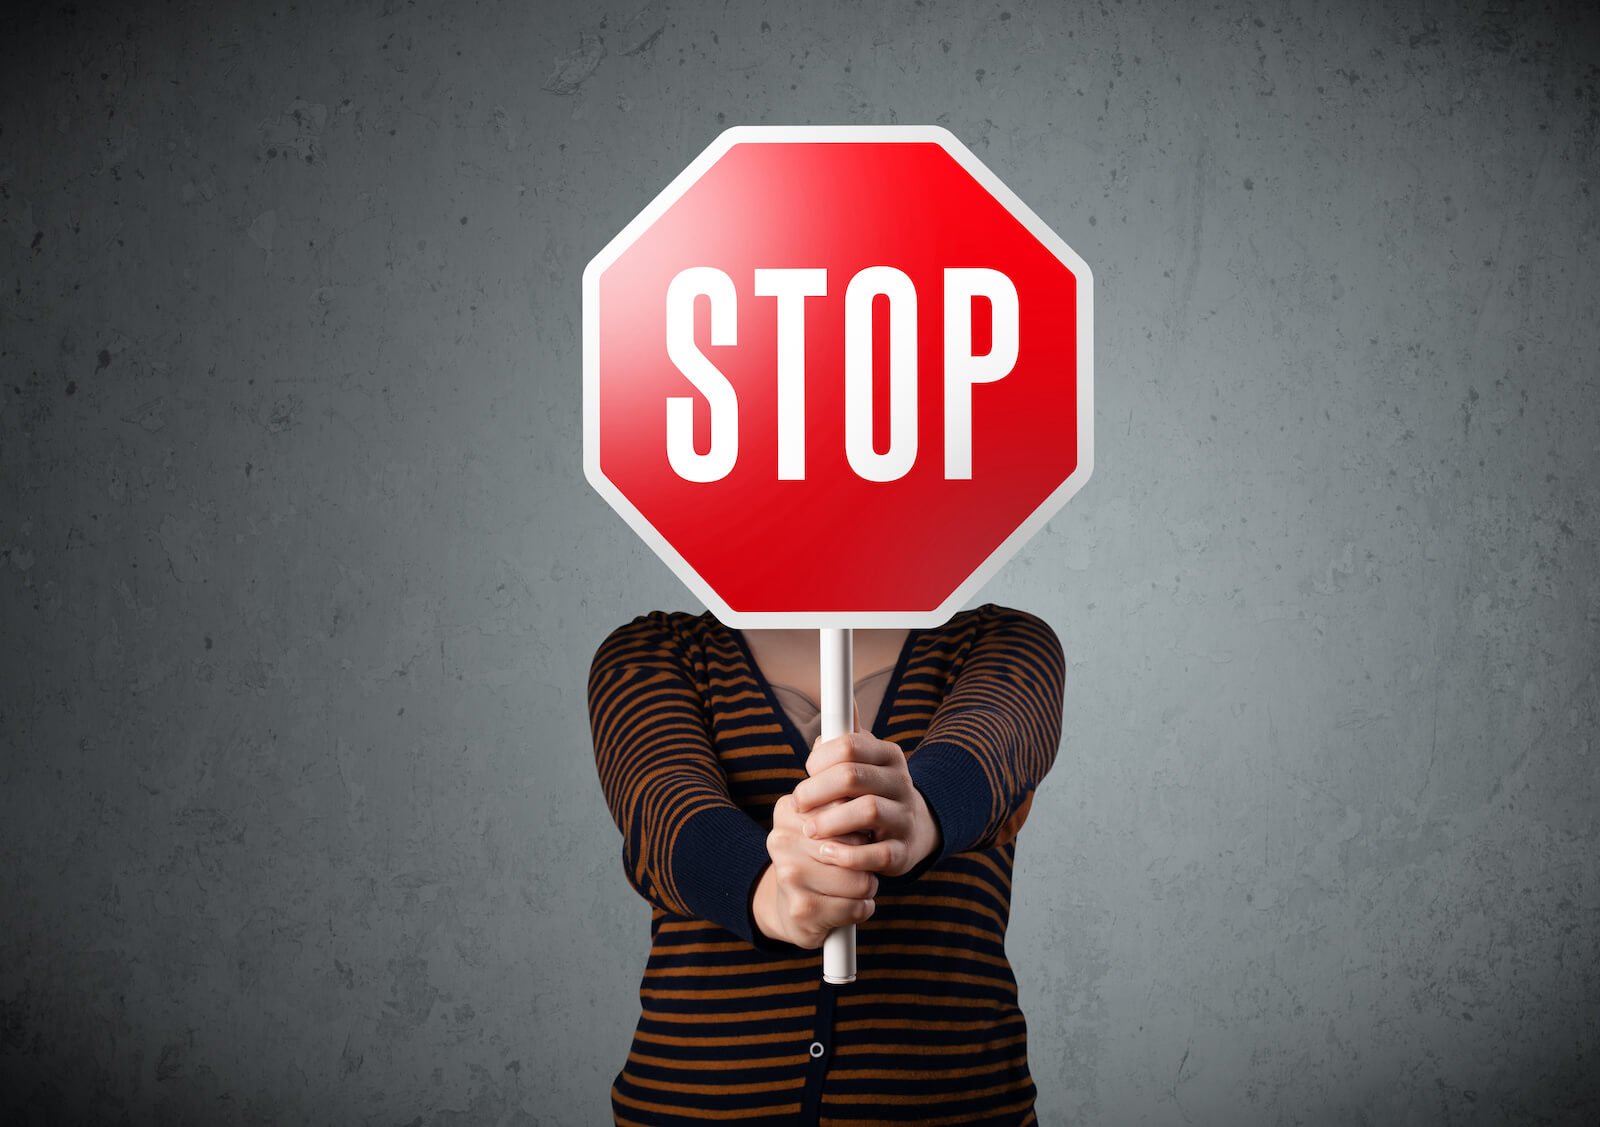 Autoimmune doctor: person holding a STOP sign